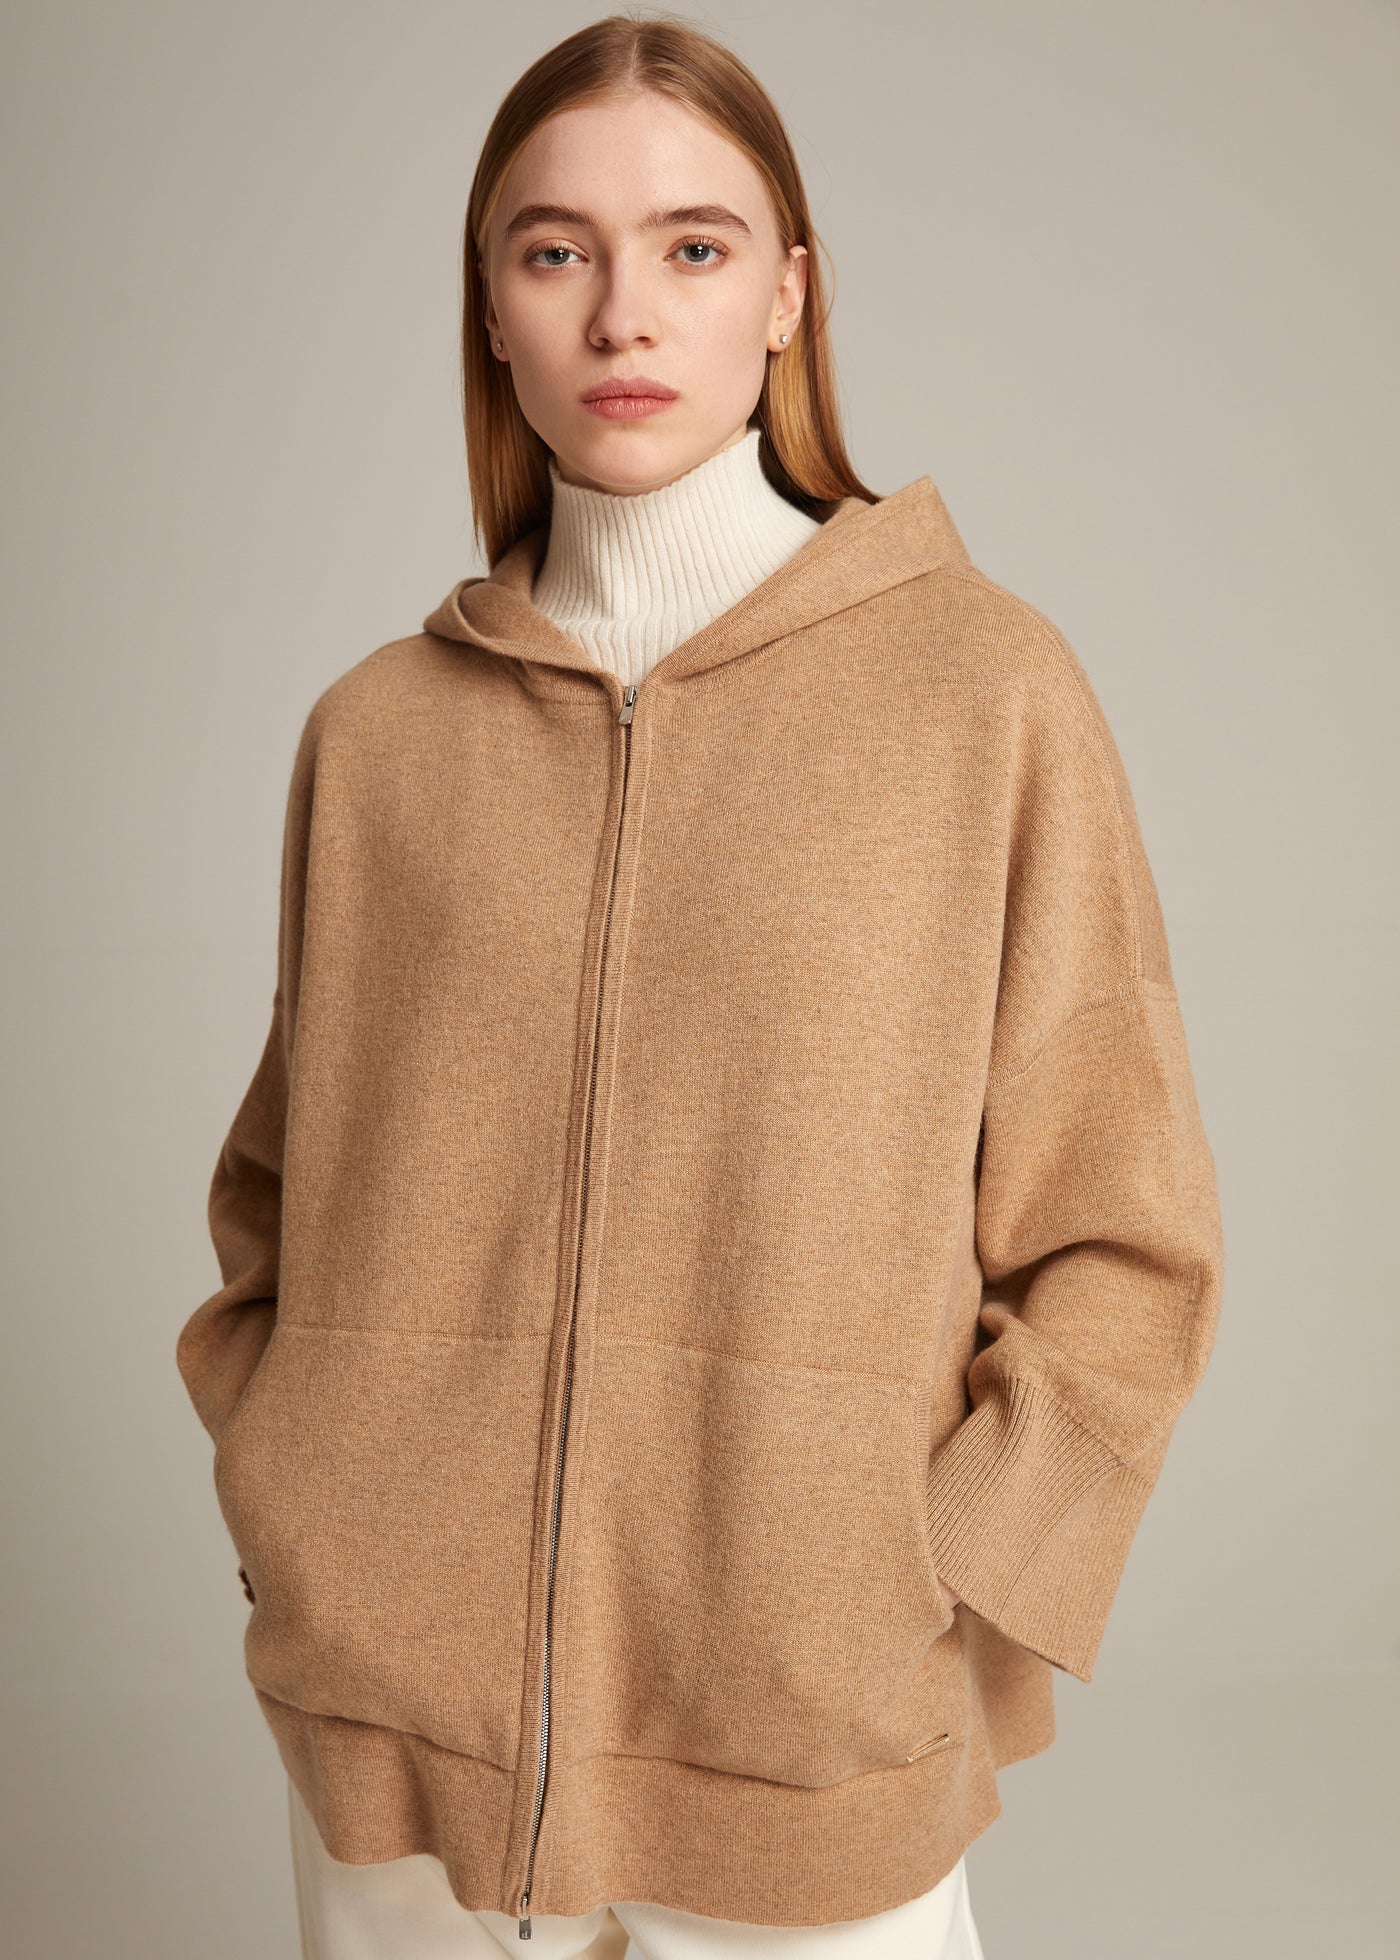 Women's Pure Cashmere Hooded Top